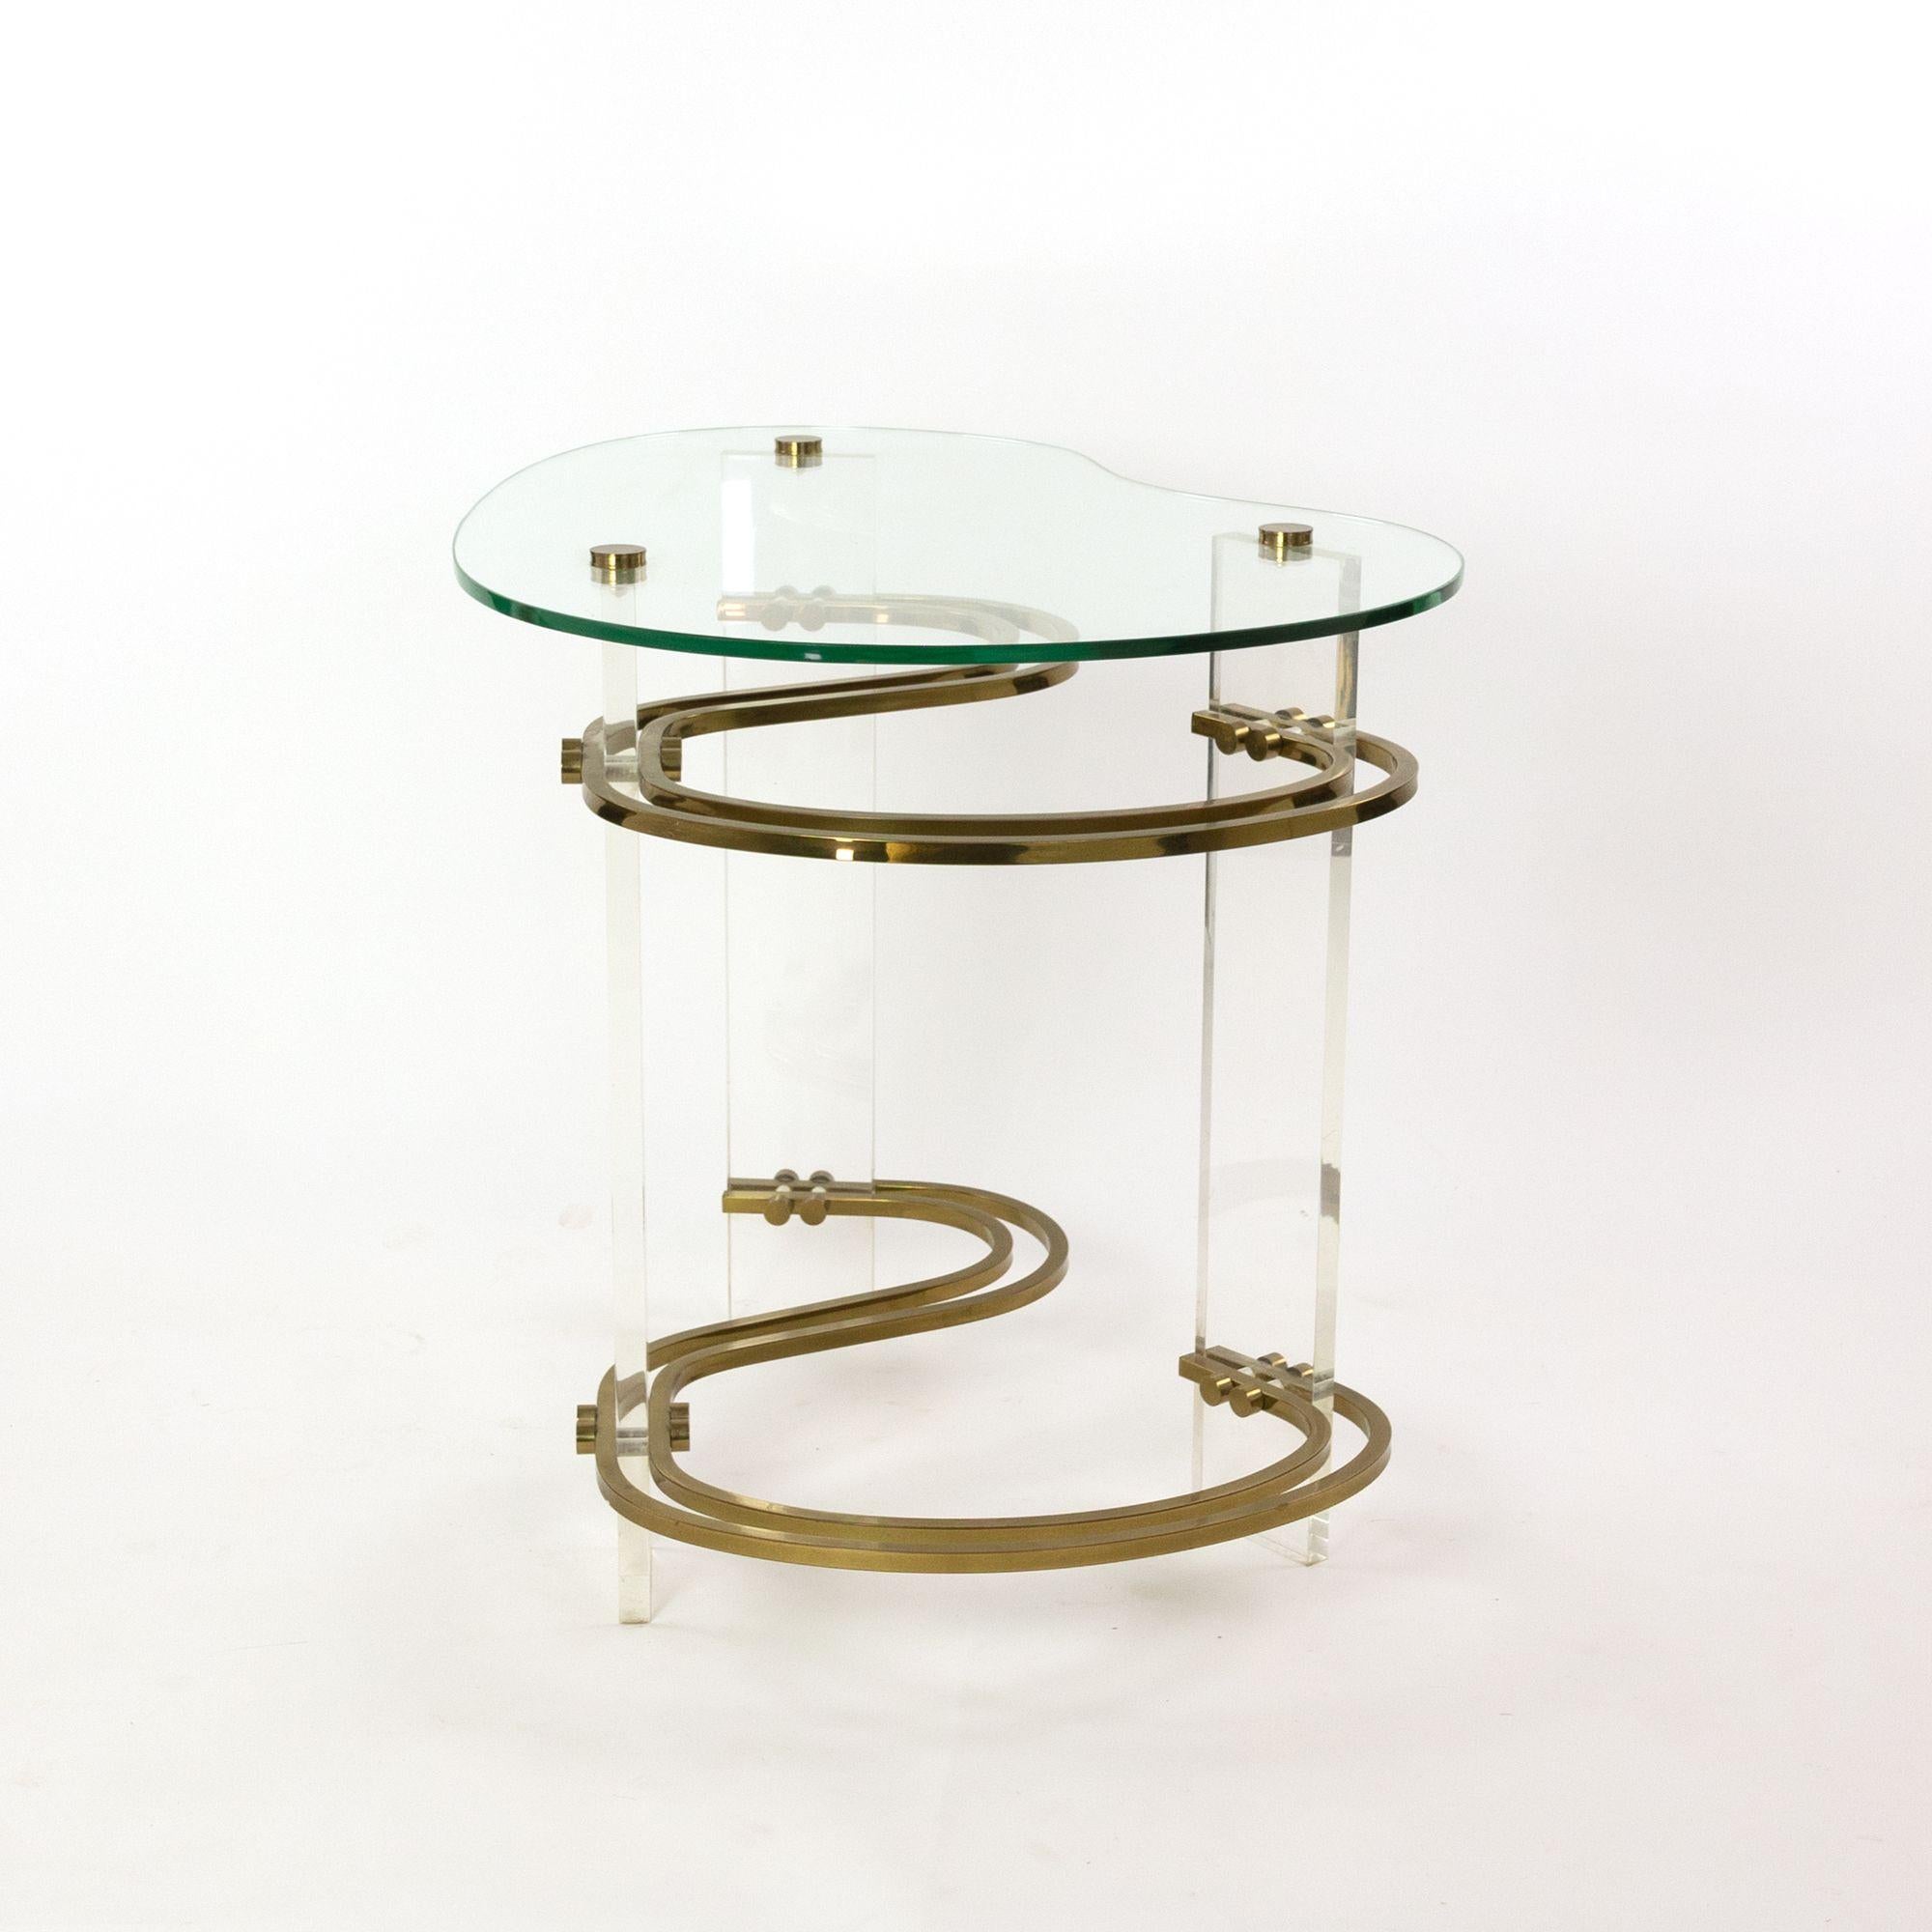 Late 20th Century Stylish Kidney-Shaped Glass and Lucite Side Table with Brass Stretchers